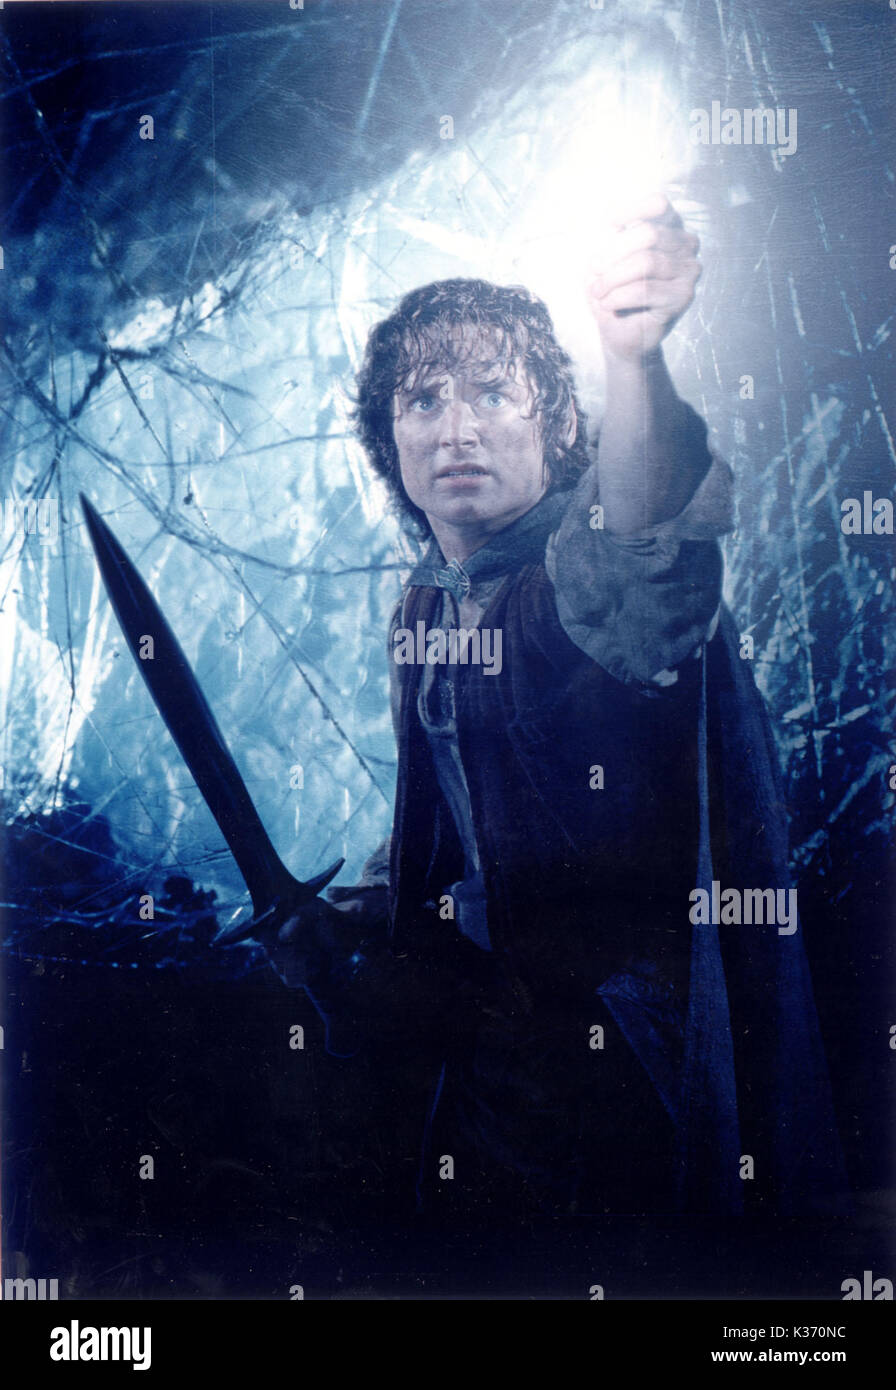 LORD OF THE RINGS: THE RETURN OF THE KING NEW LINE CINEMA ELIJAH WOOD as Frodo Baggins     Date: 2003 Stock Photo